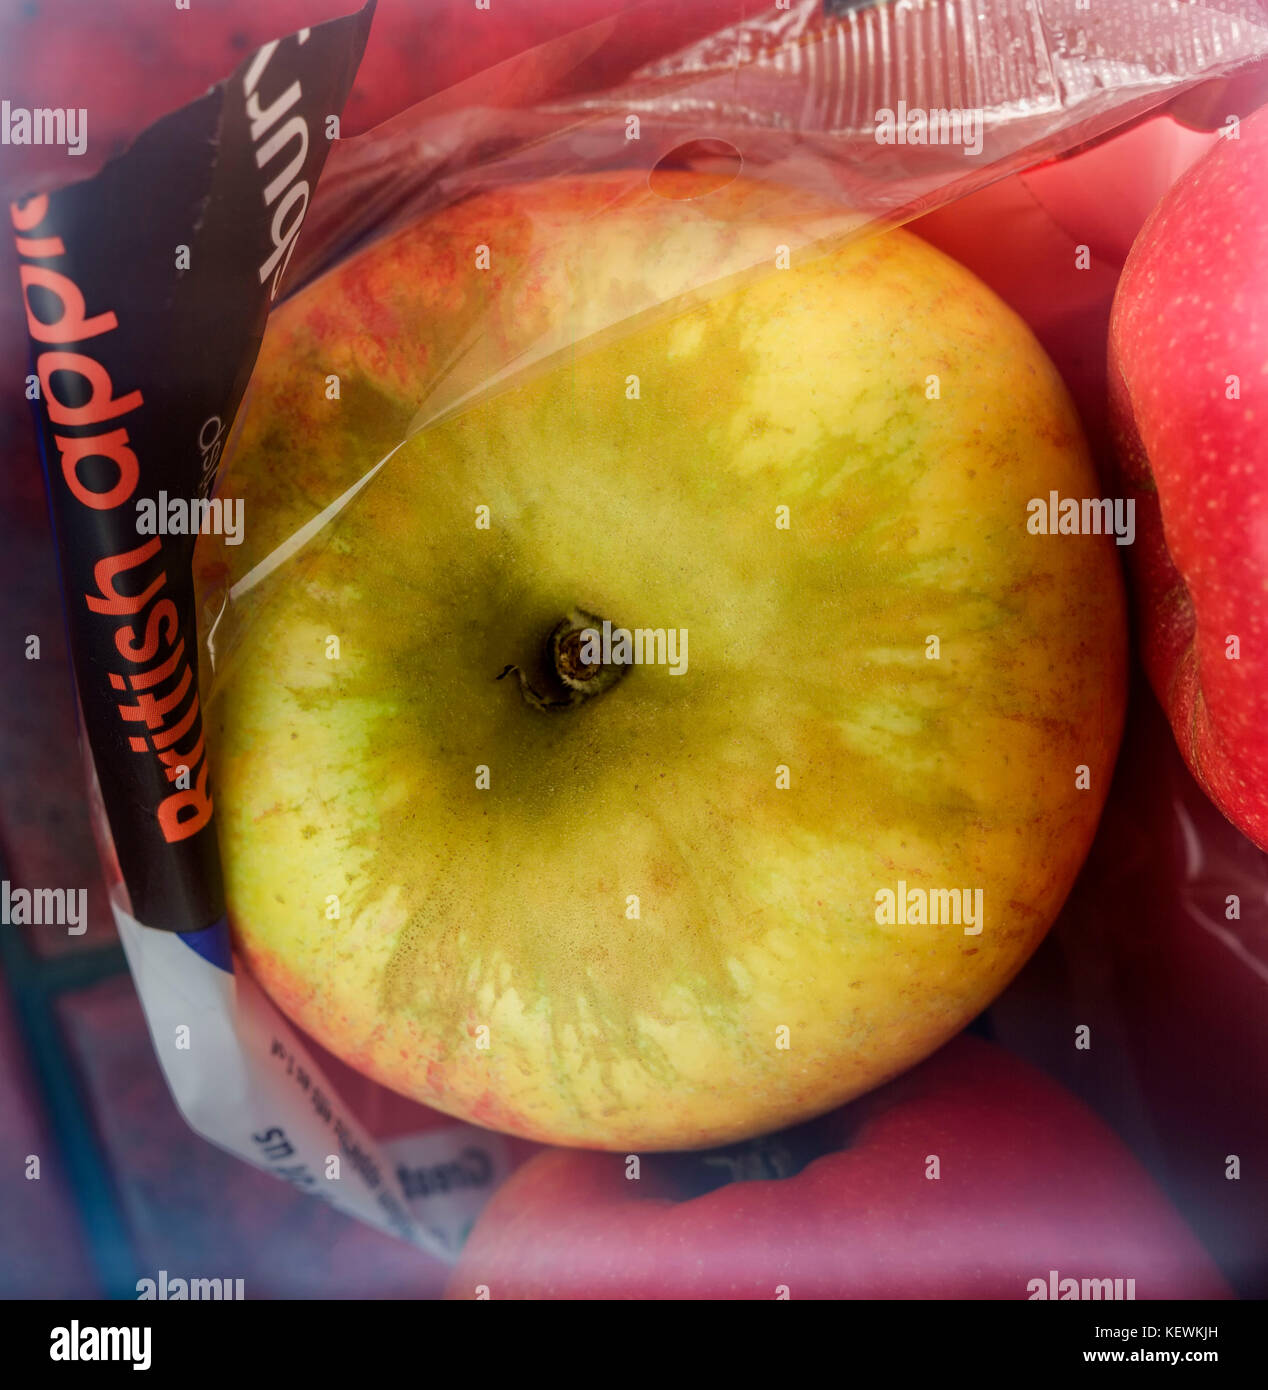 still life close-up of English apples in cellophane wrap Stock Photo